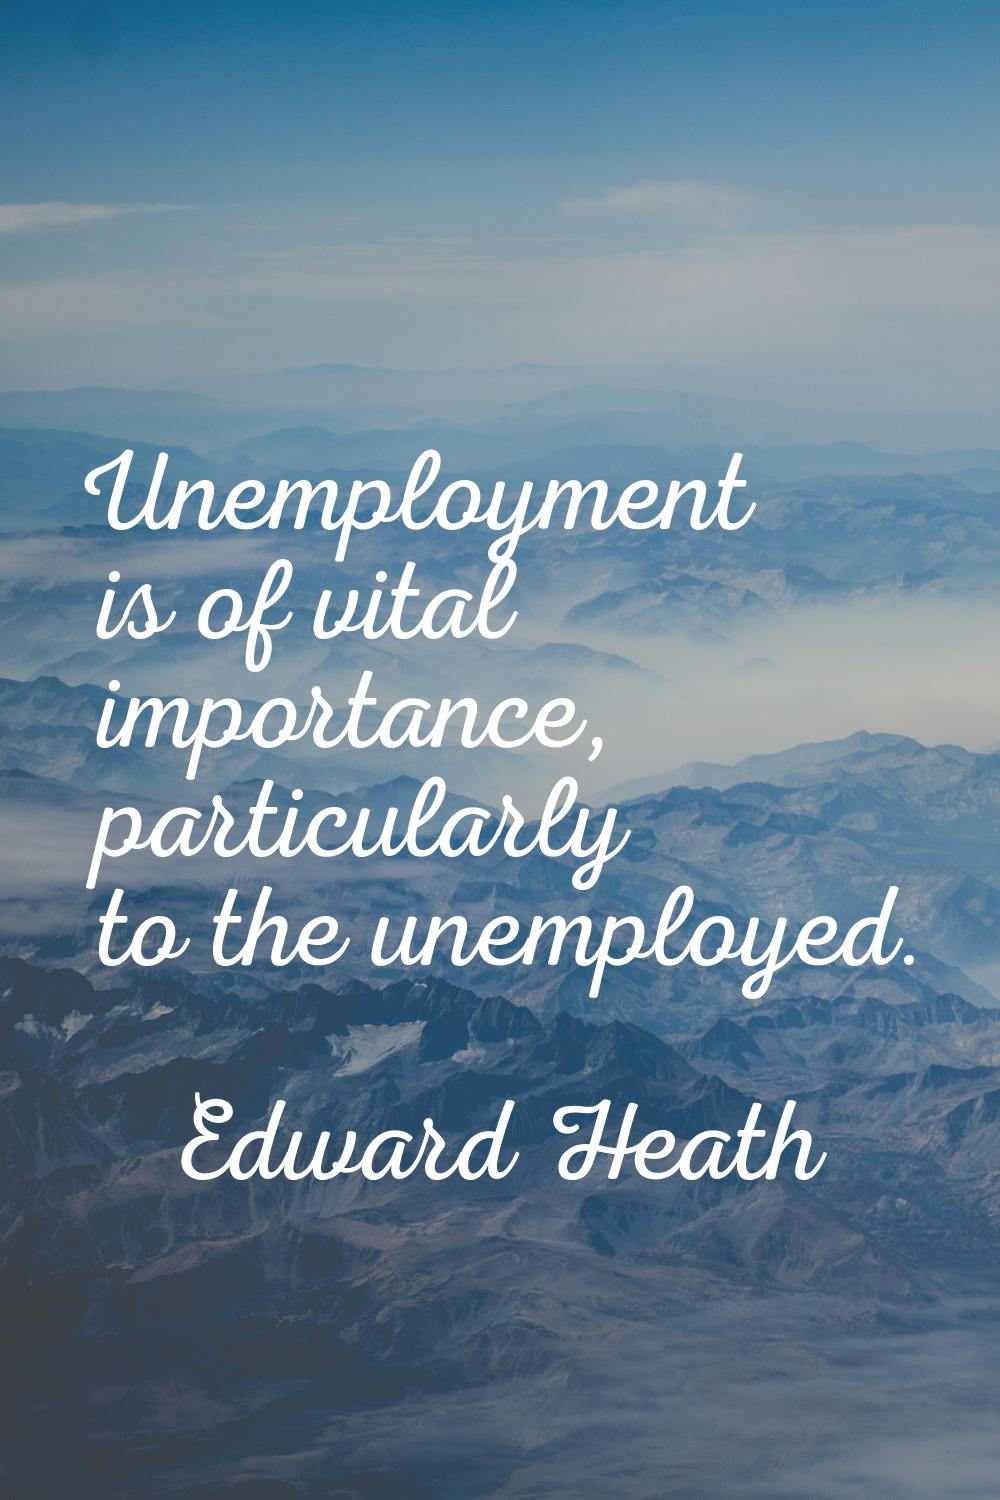 Unemployment is of vital importance, particularly to the unemployed.